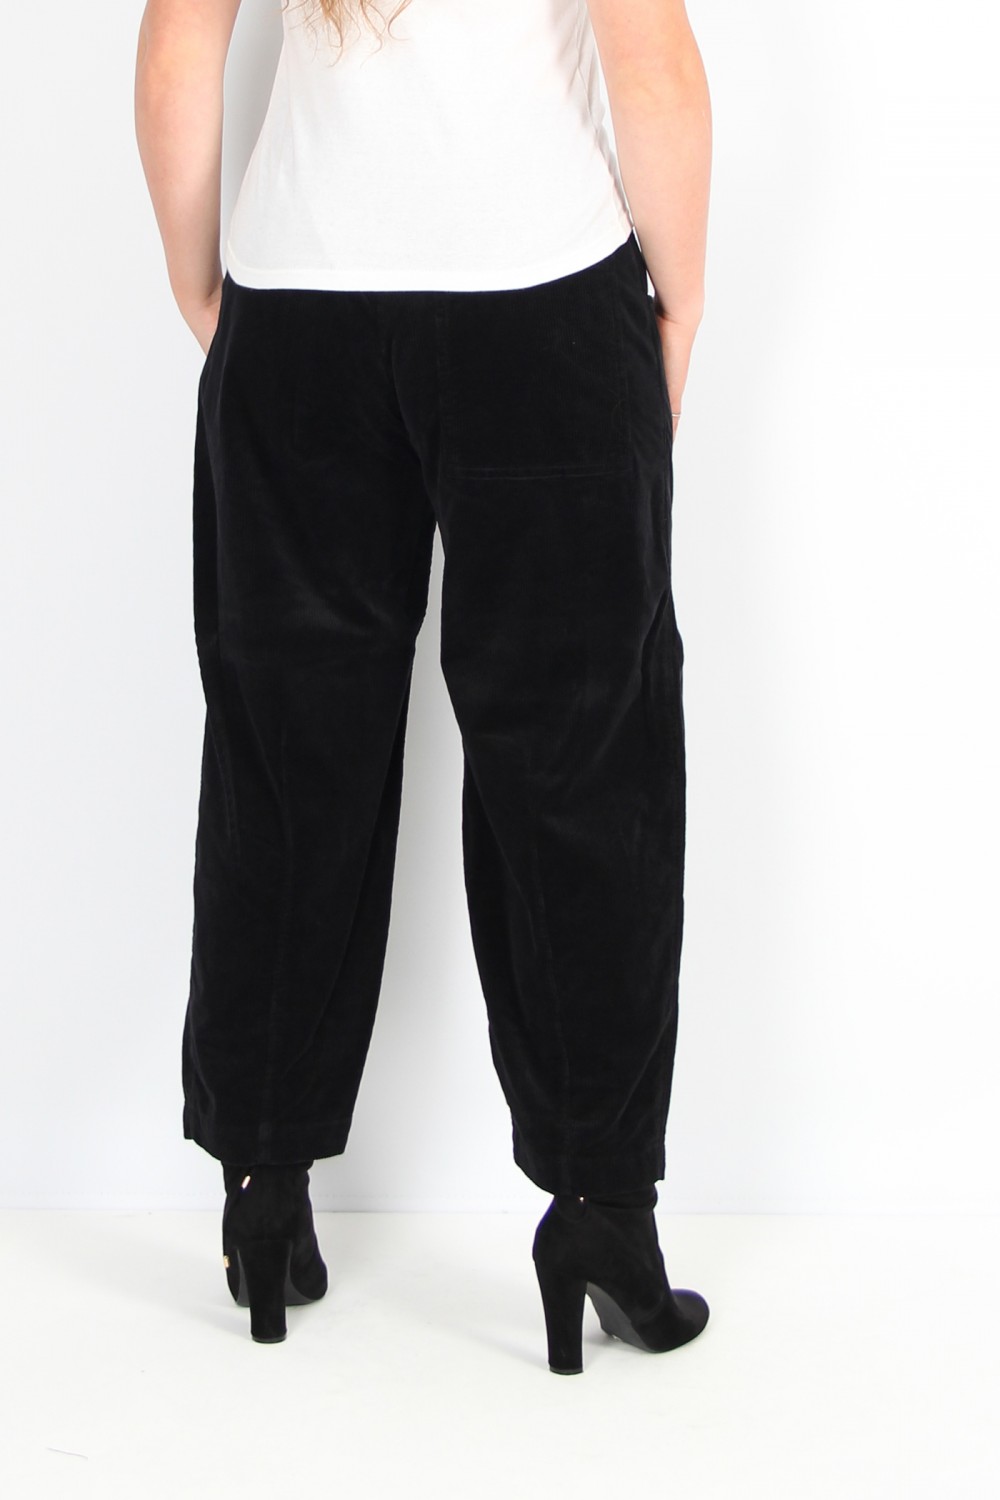 OSKA Trousers Kahren 314 Black / Cotton Cord With Stretch Content